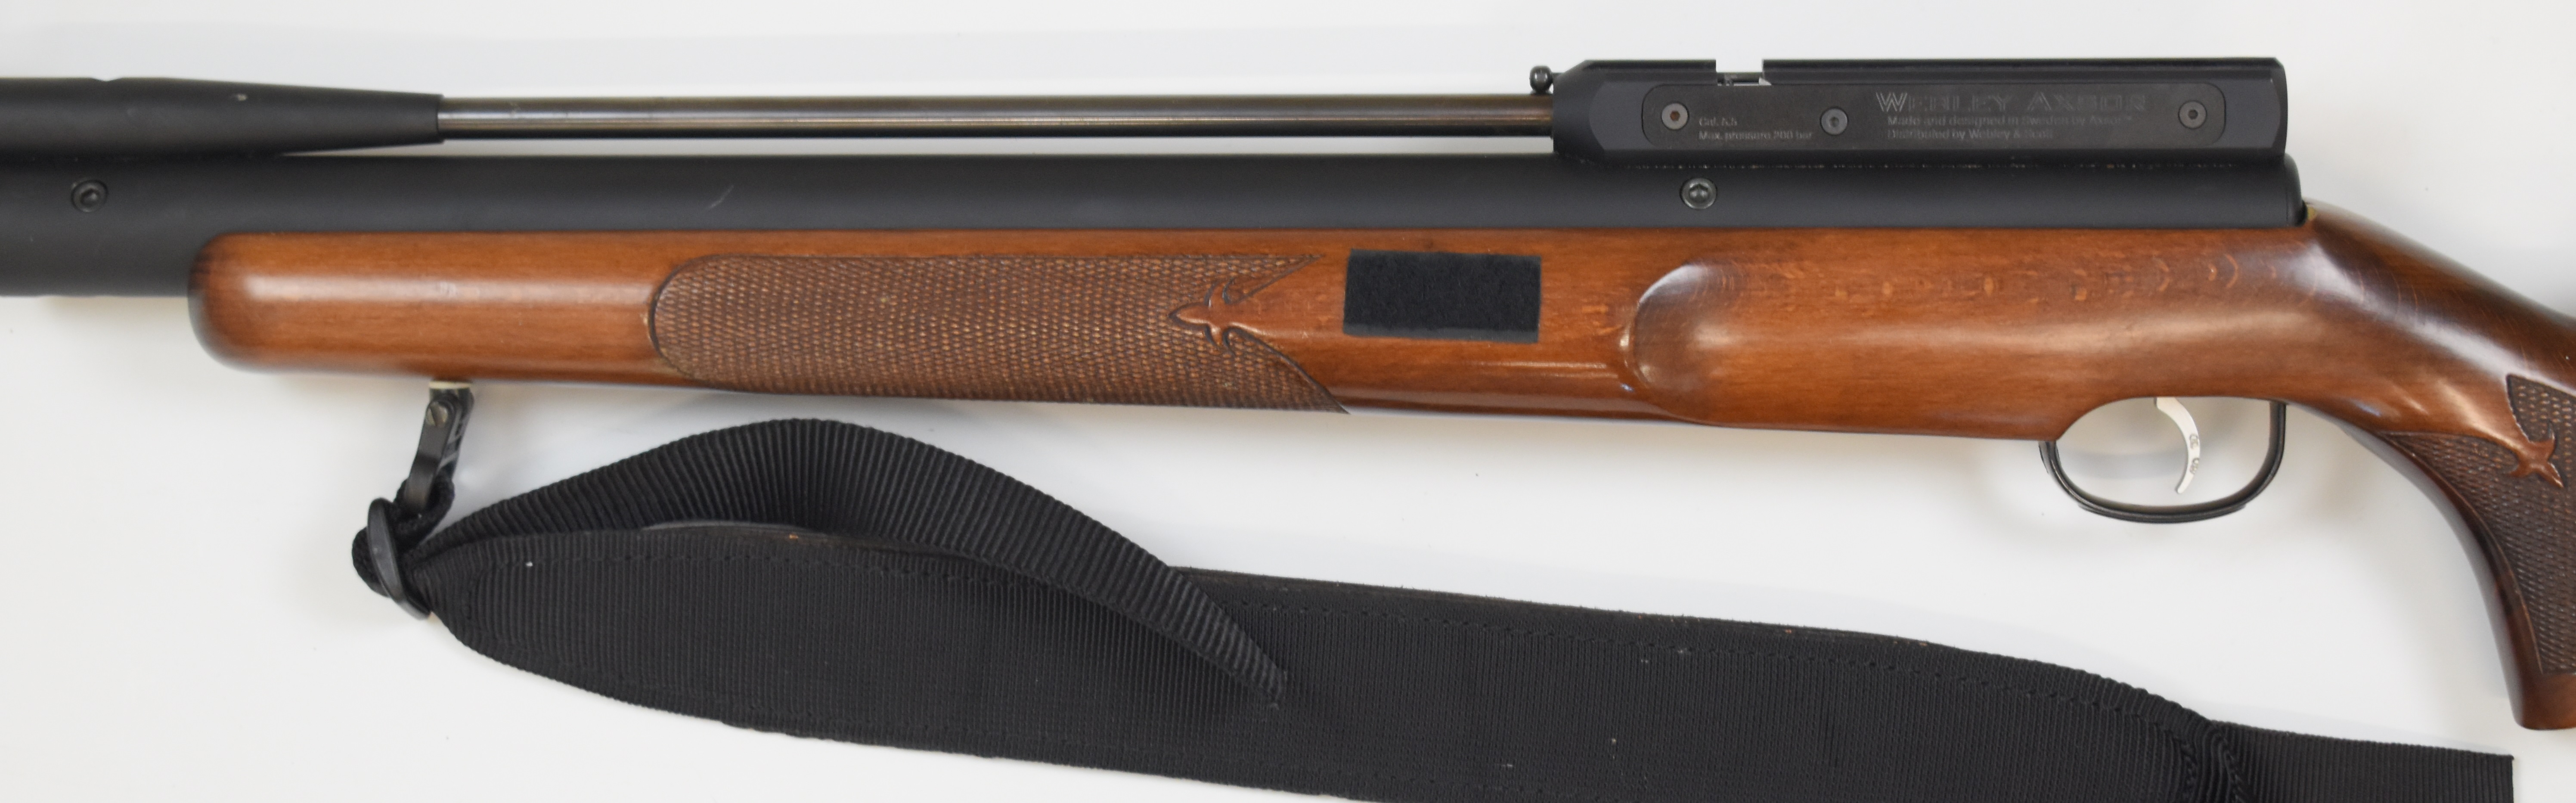 Webley Axsor .22 PCP air rifle with chequered semi-pistol grip and forend, raised cheek piece, - Image 18 of 20